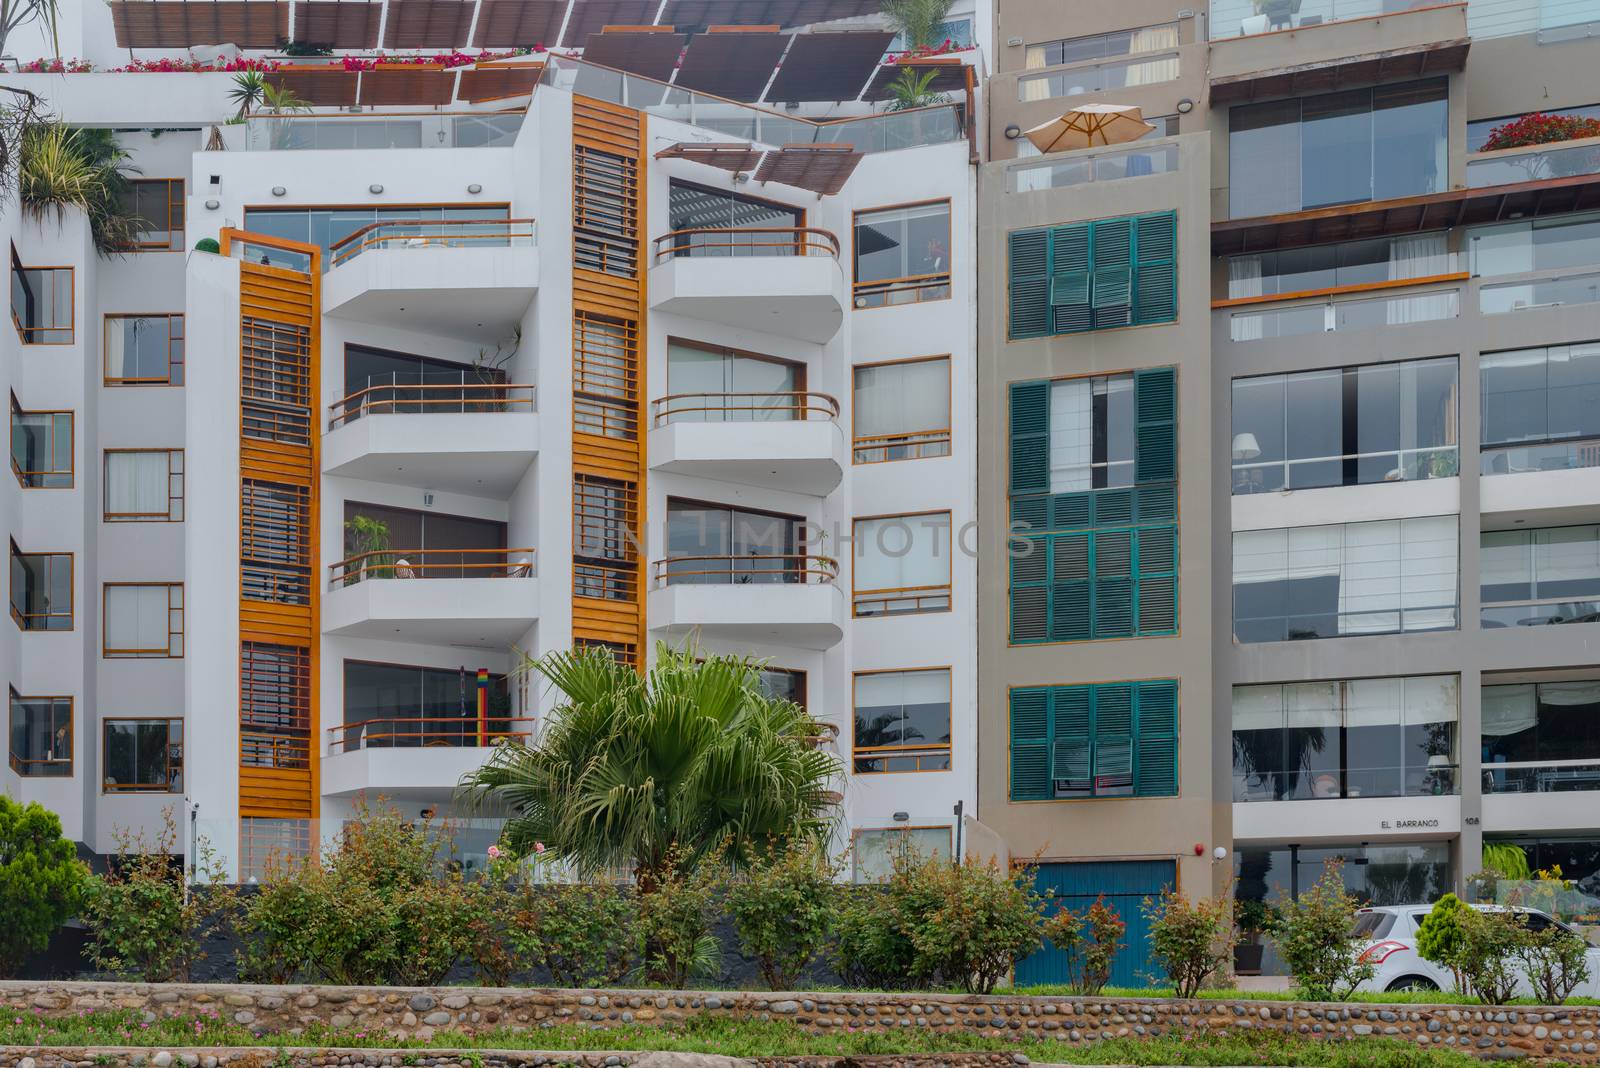 Condos in the Barranco District by jfbenning